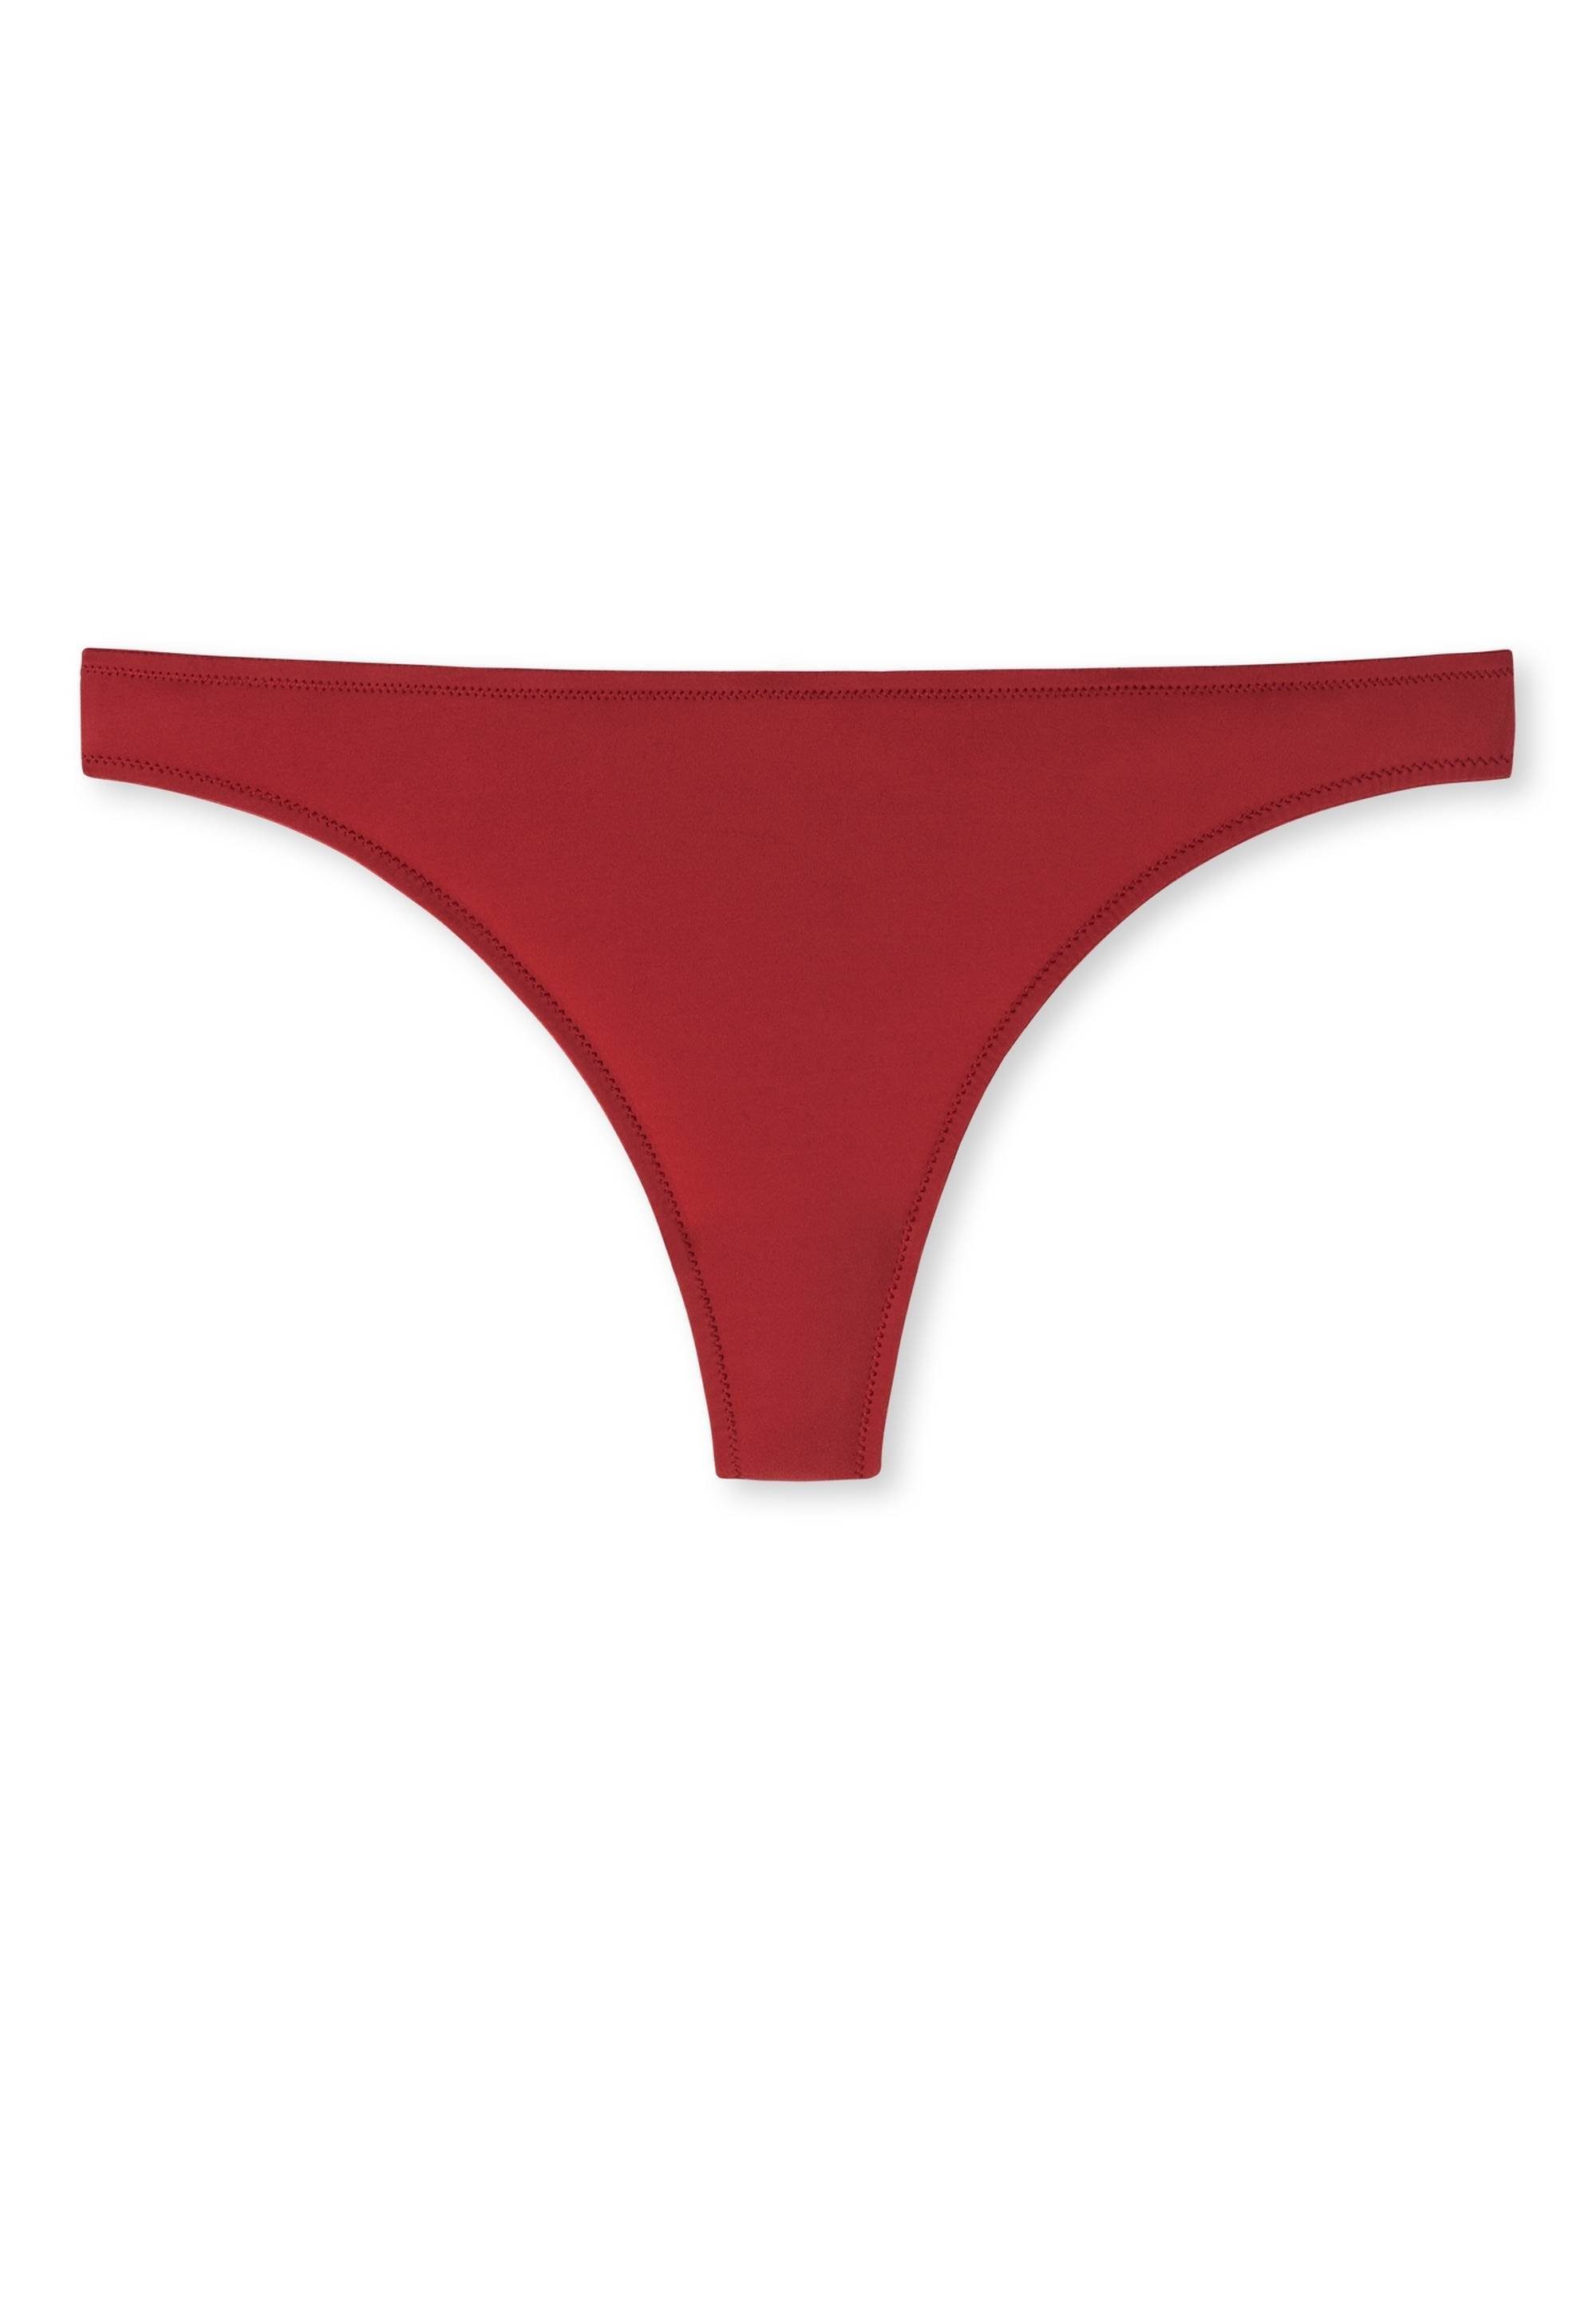 String Single Schiesser Invisible - Damen String, Rot Lace Jersey